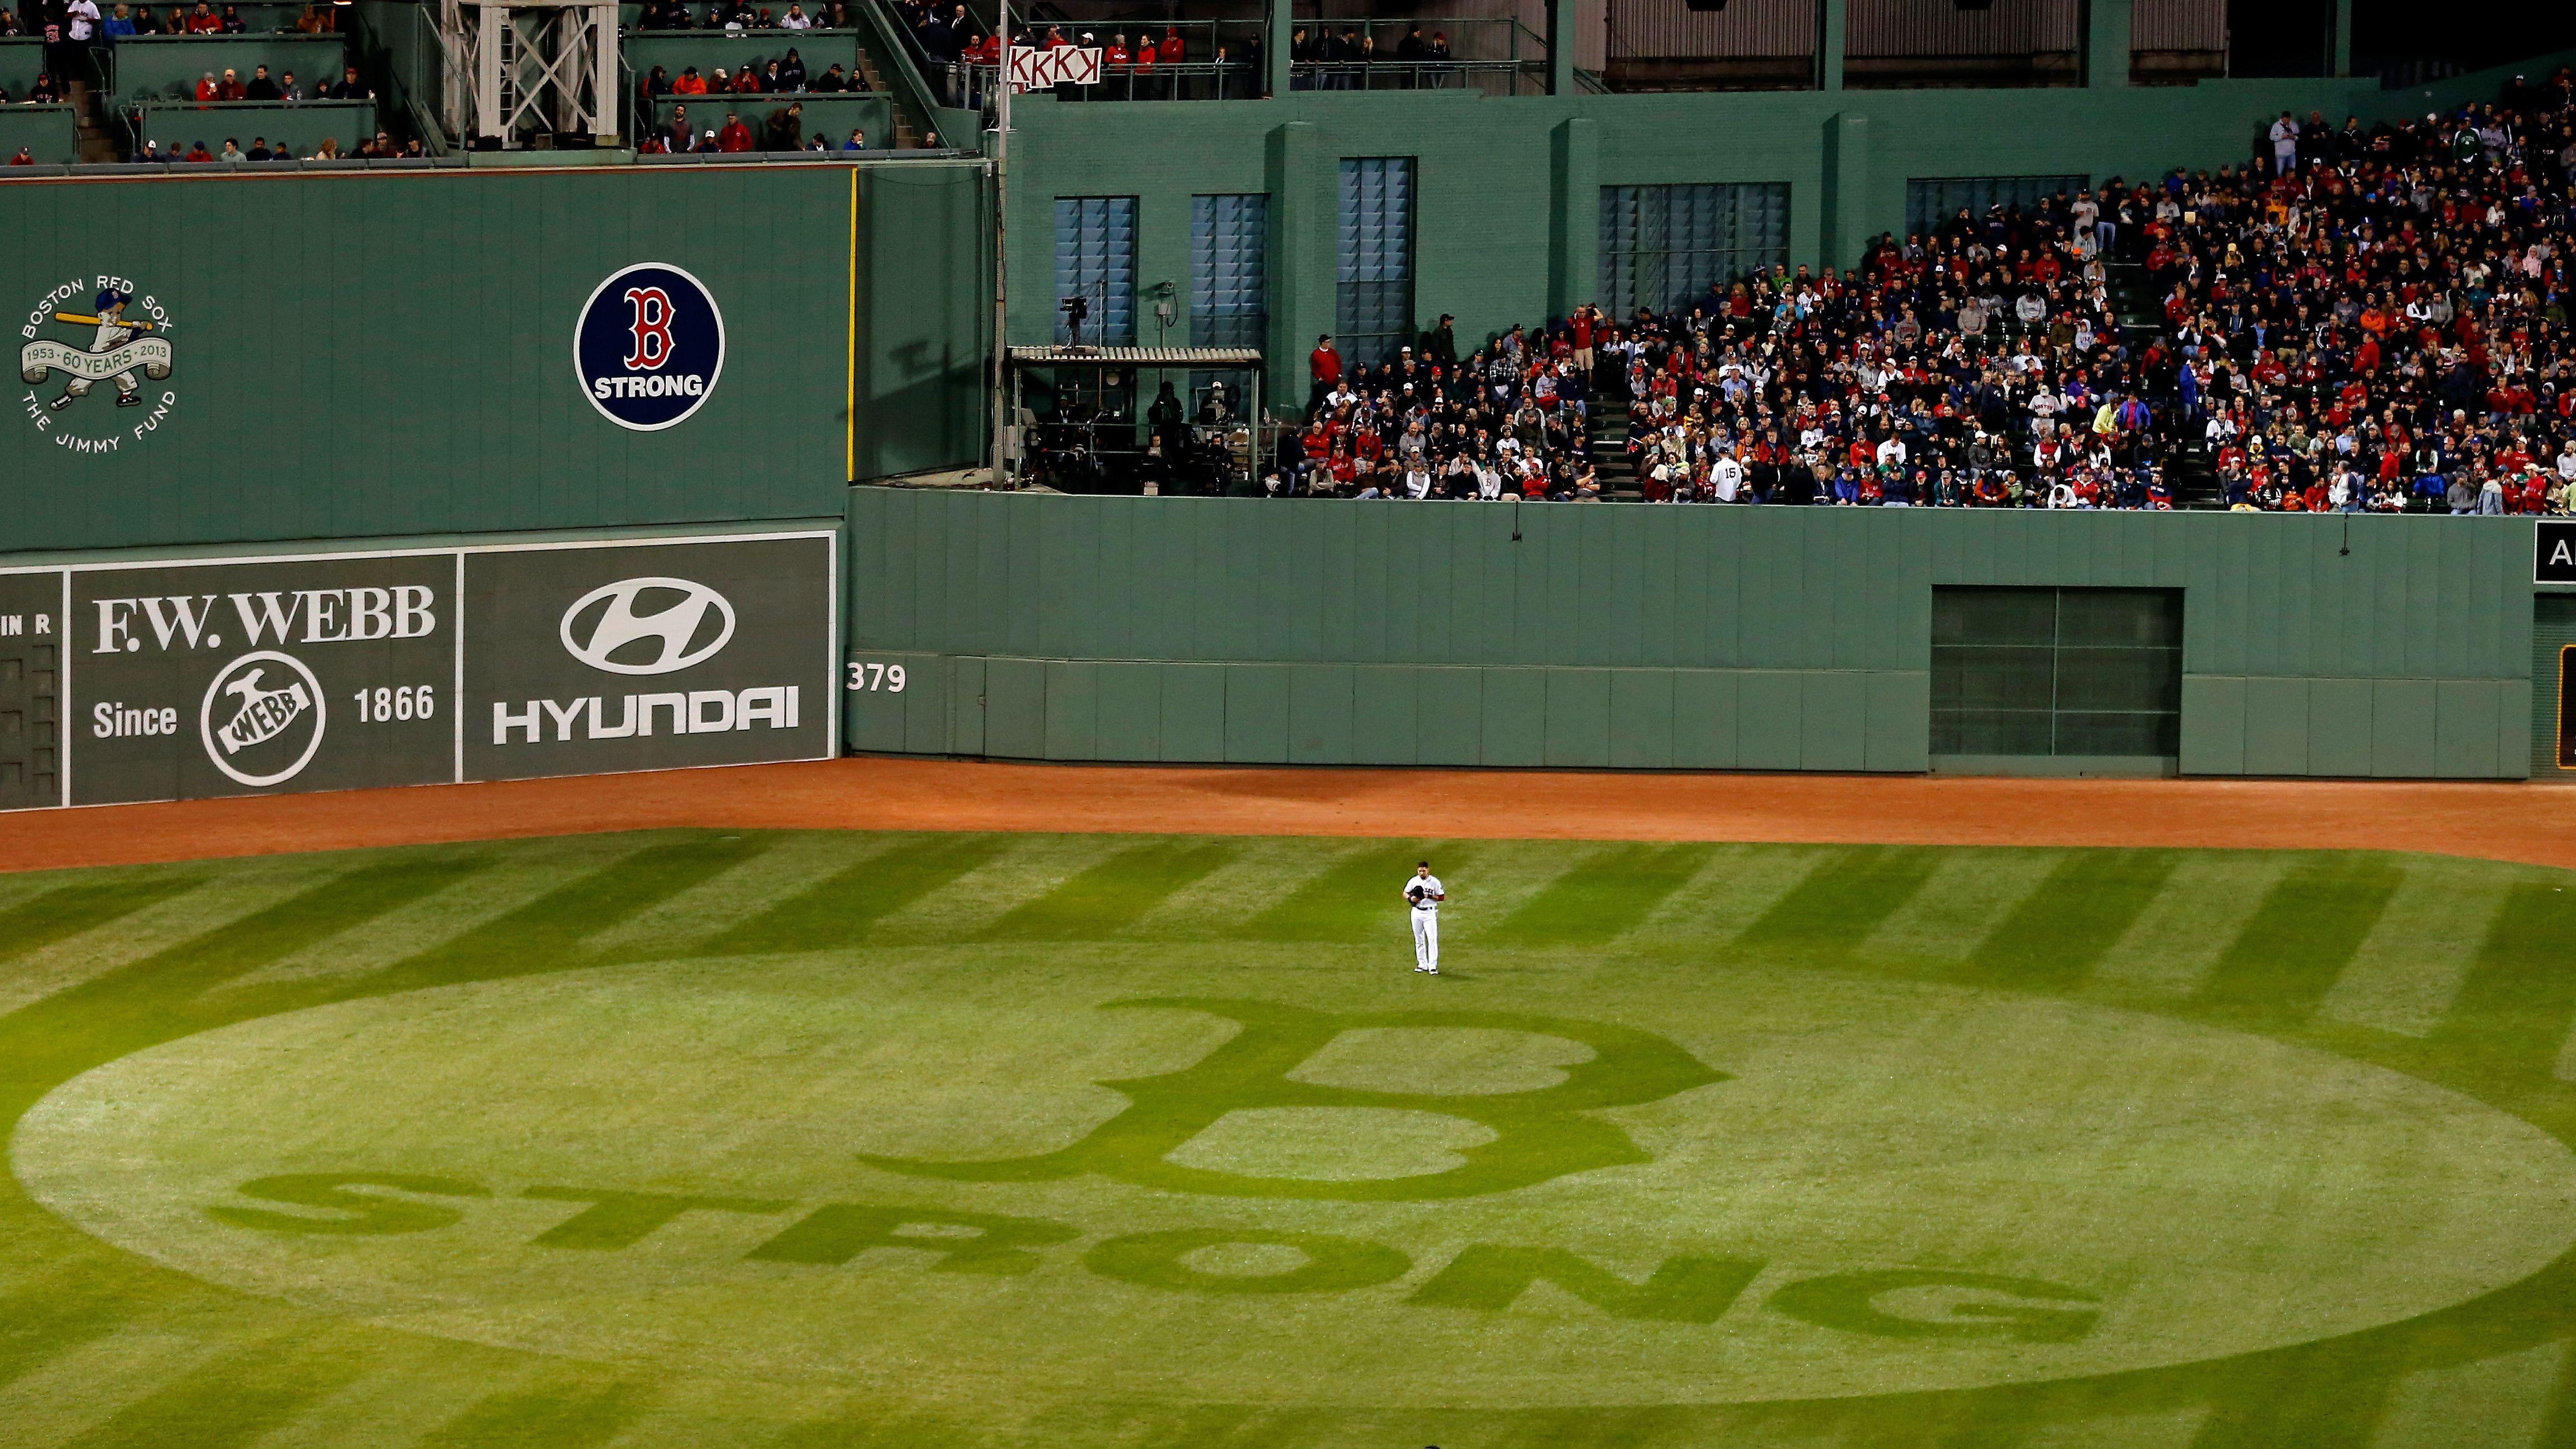 B Strong Logo - Report: Red Sox May Be Sued By Charitable Foundation Over Use Of 'B